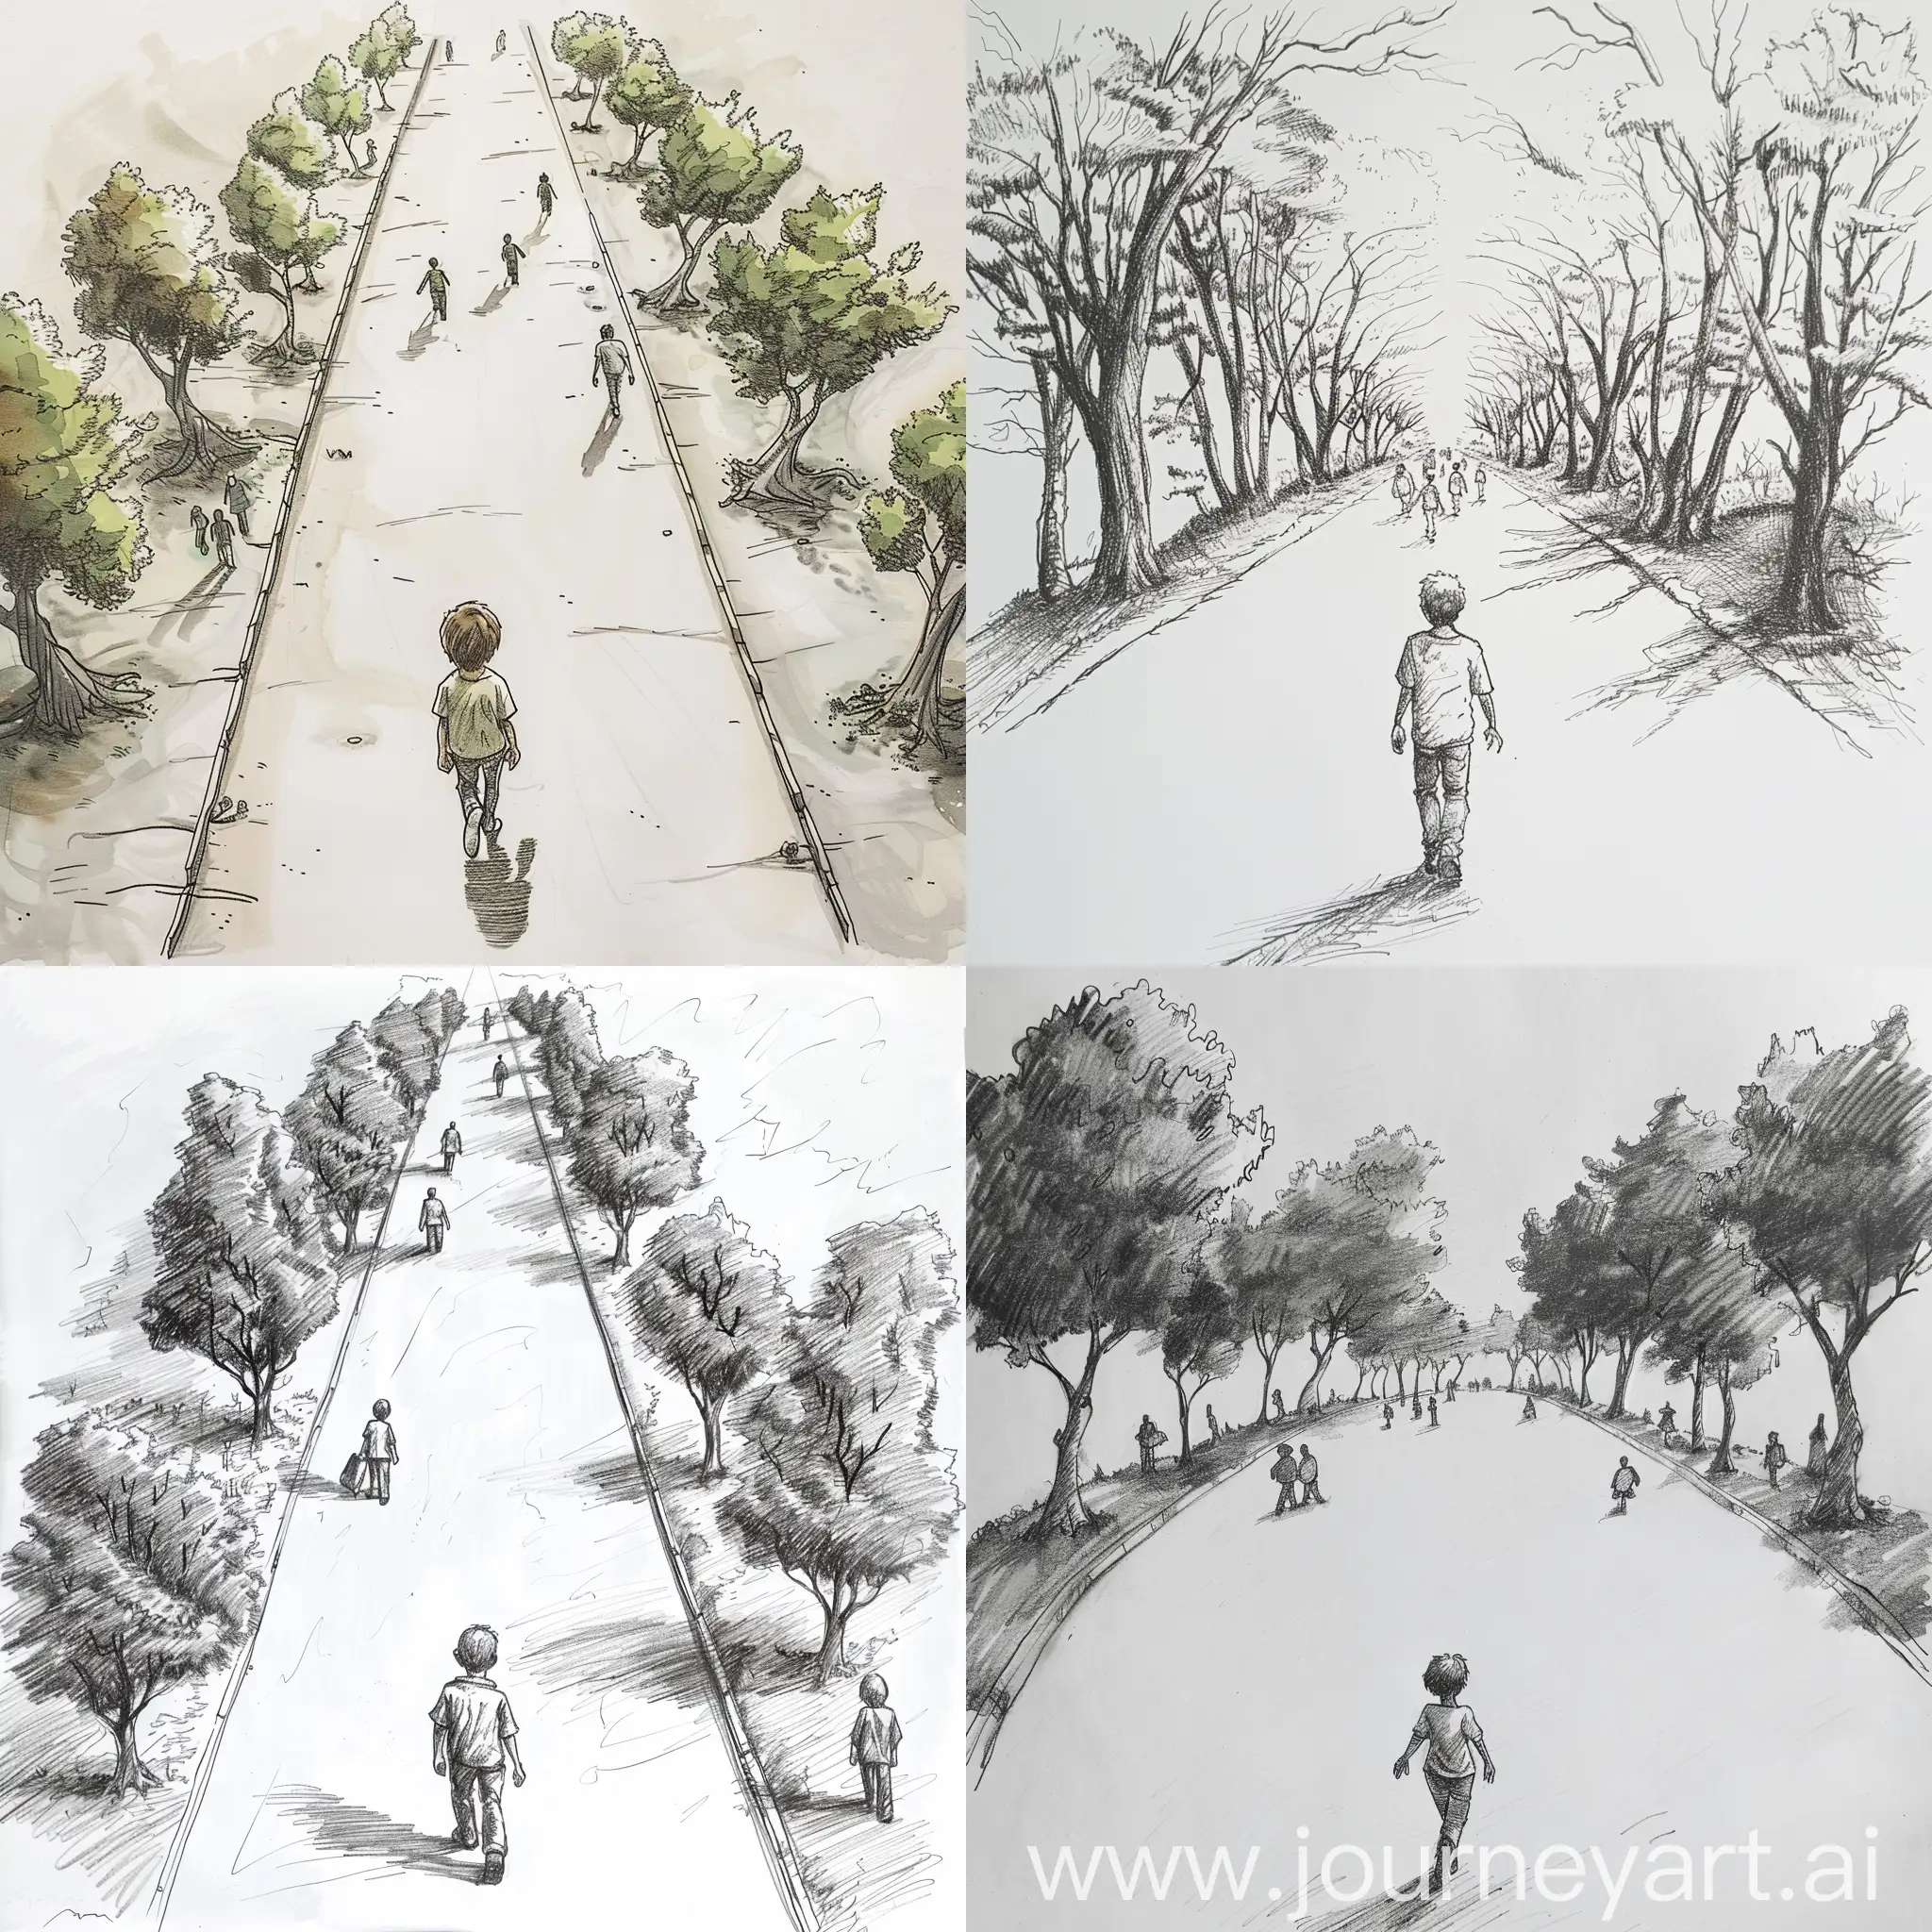 draw a picture of a boy who is walking alone on the road.
there are lots of tree on the two sides of the road.
Some people are also walking hrere and there